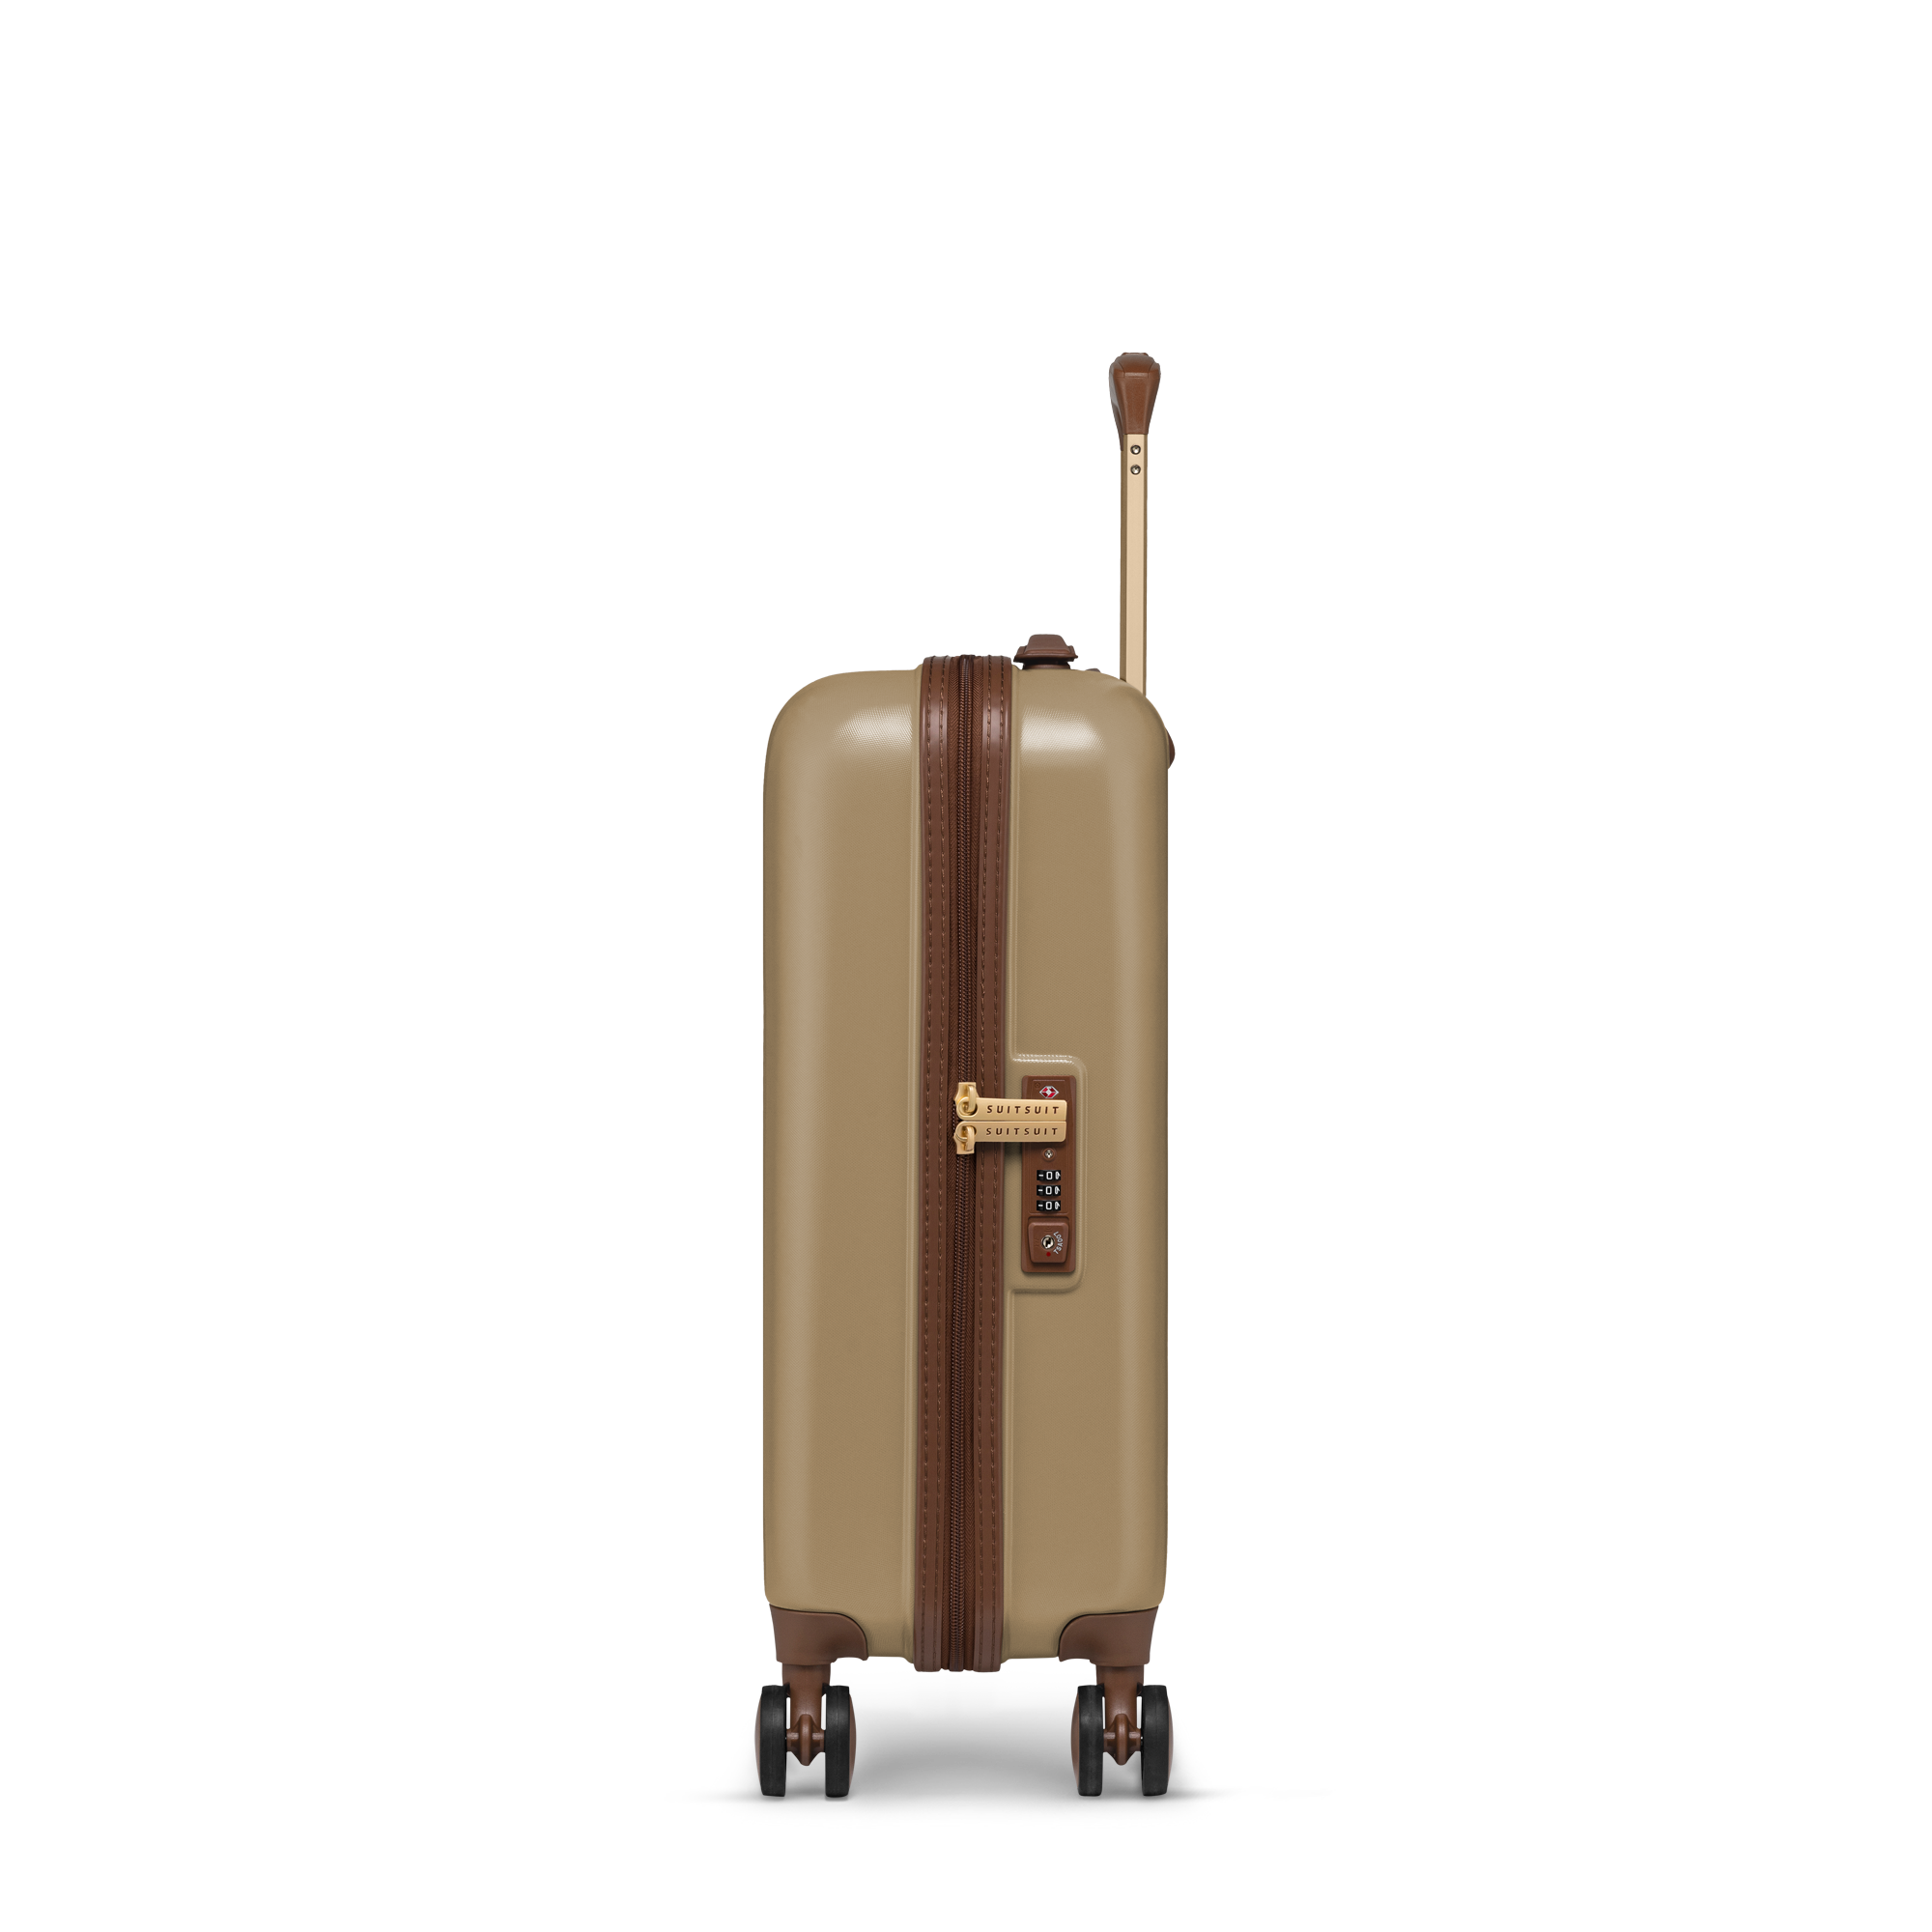 Fab Seventies - Cuban Sand - Carry-on (20 inch)